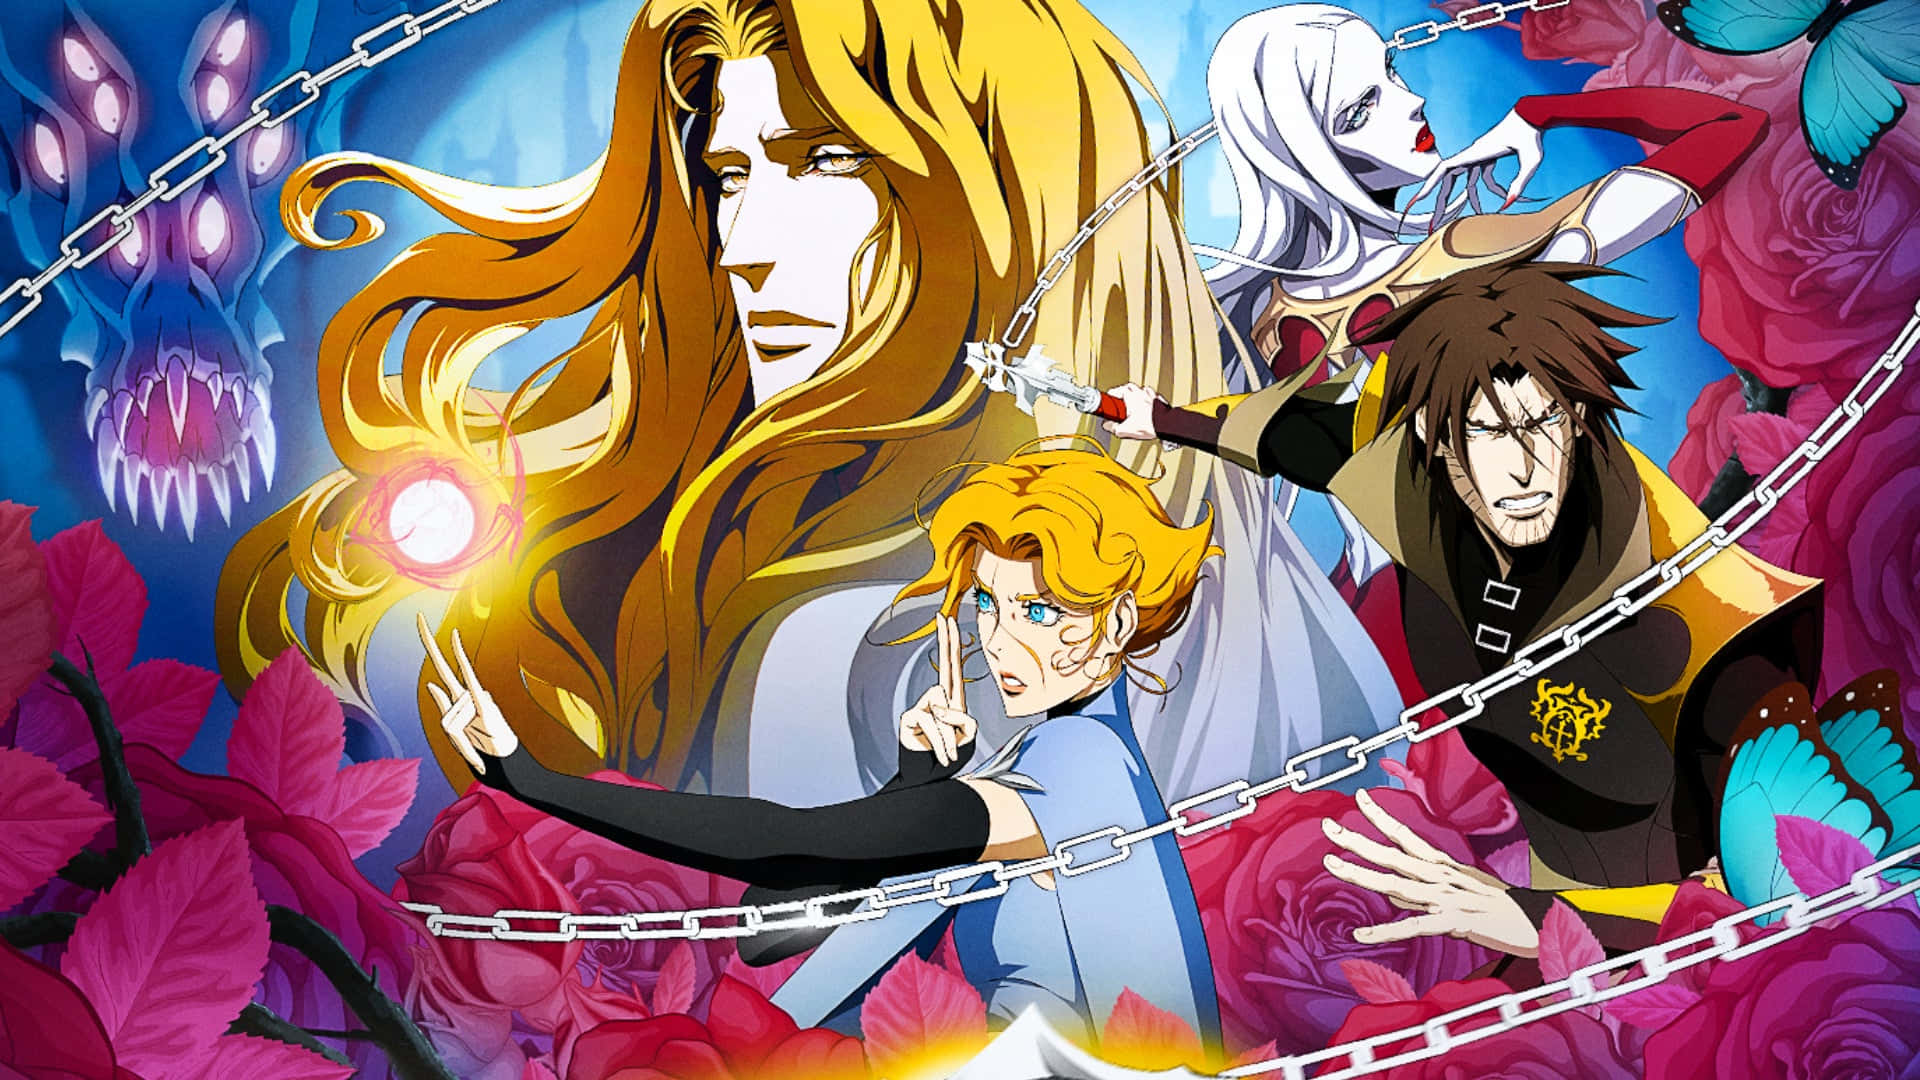 Castlevania Netflix Animated Series Characters Wallpaper